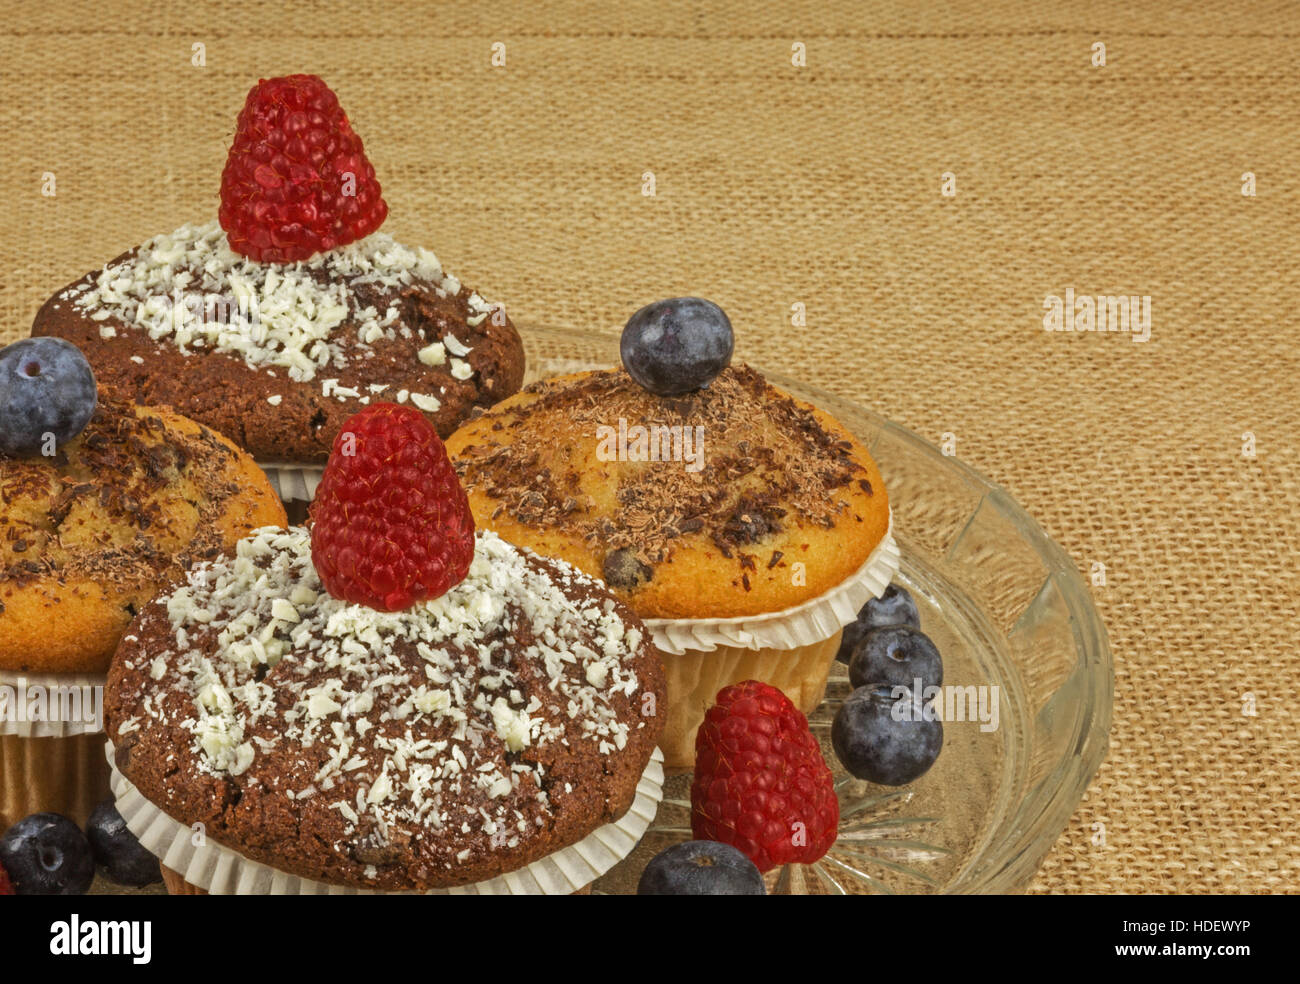 Four muffins sprinkled with grated chocolate and garnished with fresh raspberries and blueberries on a glass plate and the whole bob on the tablecloth Stock Photo